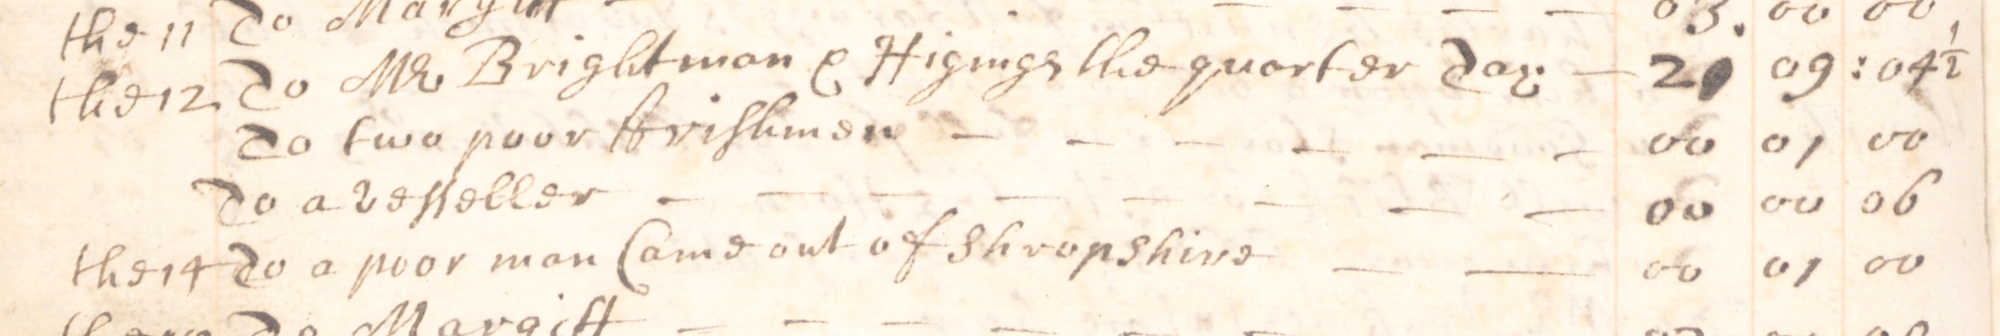 1699 document handwritten in English referring to a vesseler